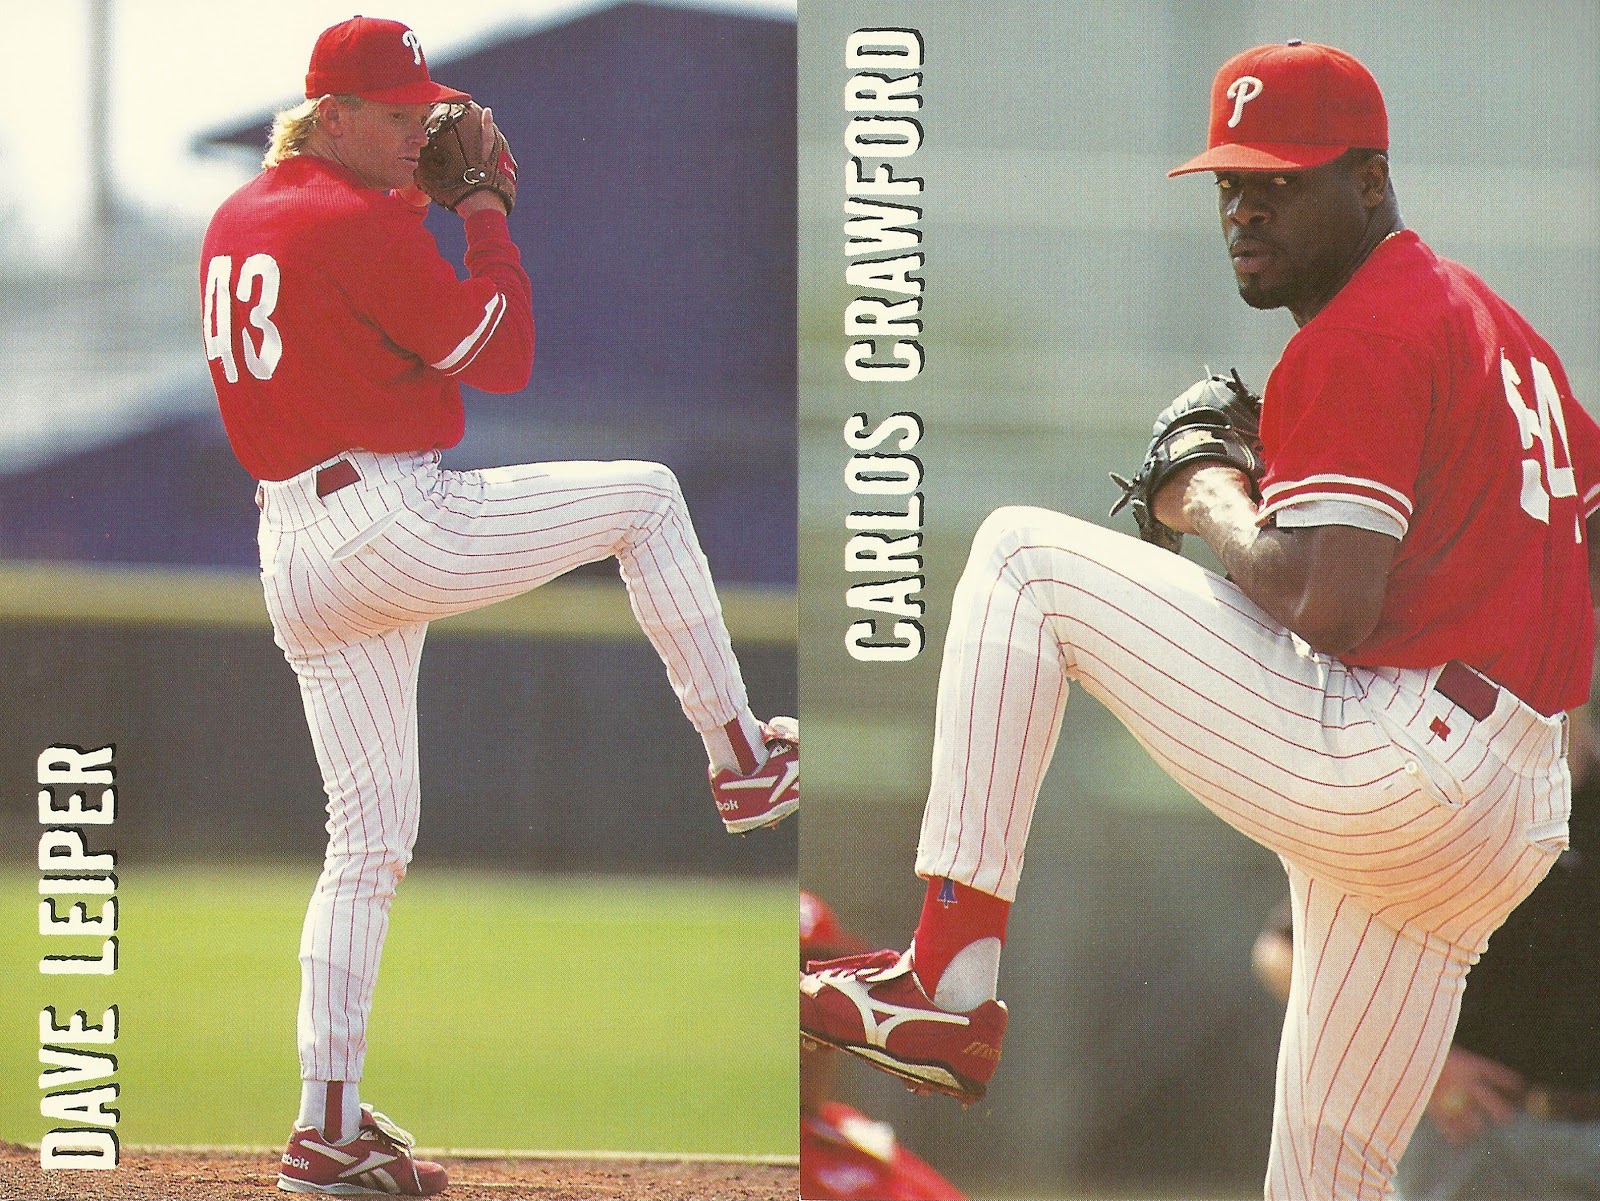 1996 Draft: What if Jimmy Rollins was on the Colorado Rockies?